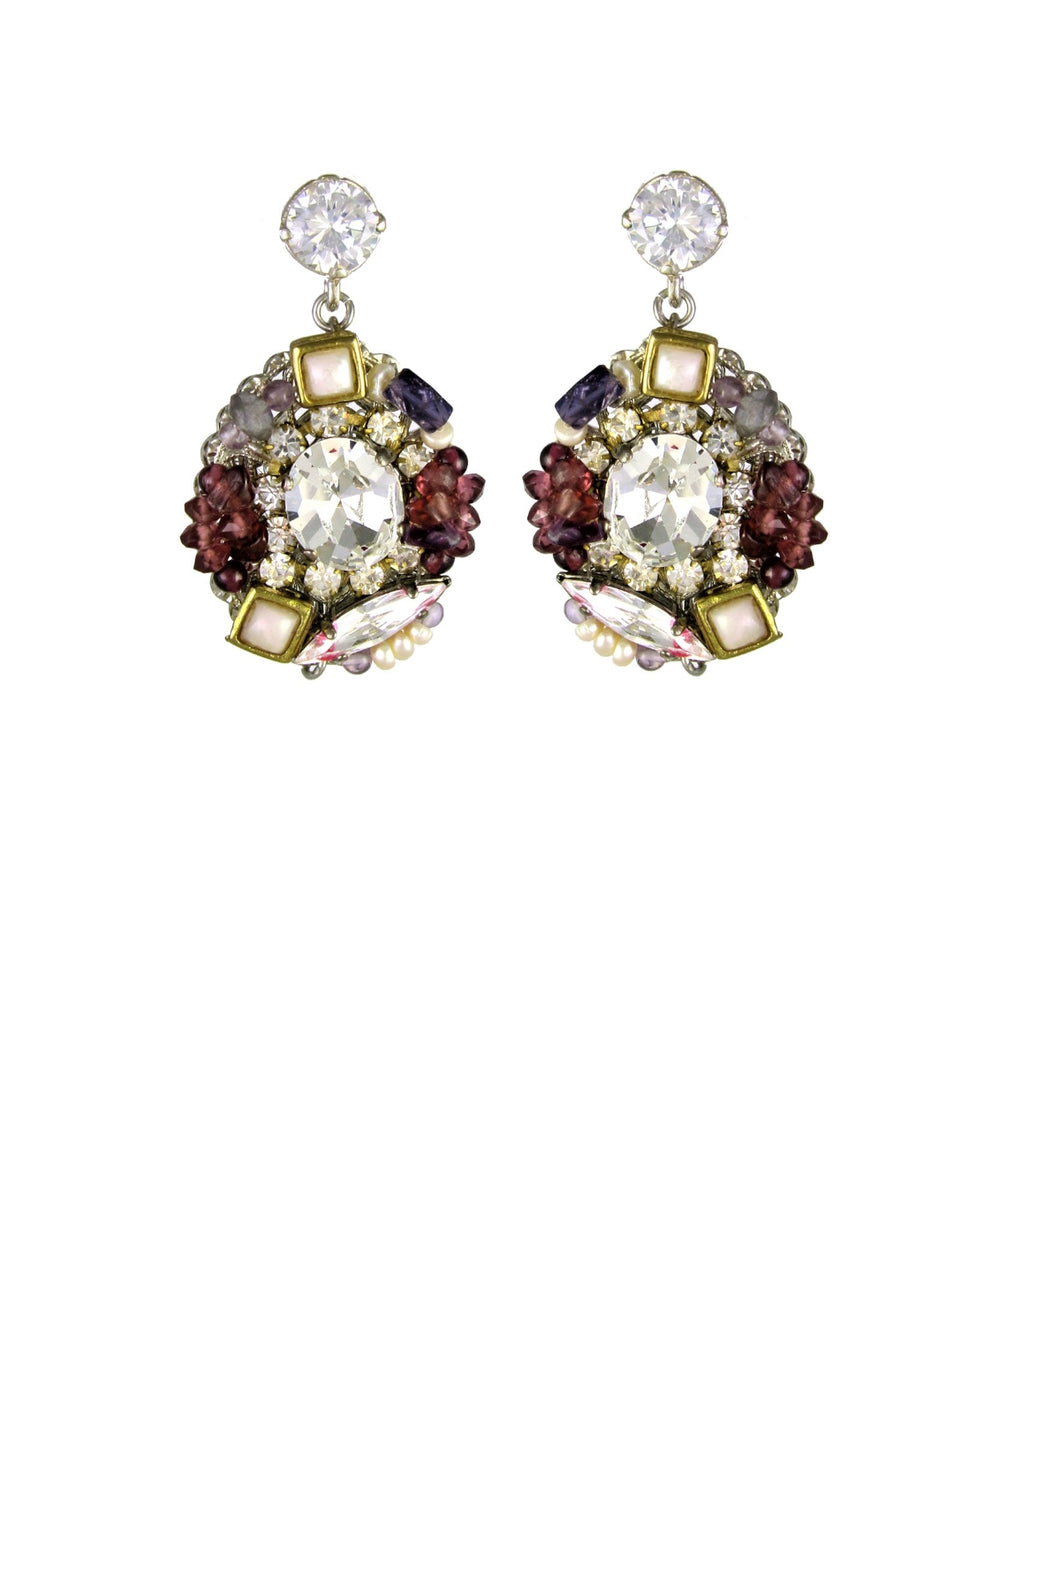 SALE - Claire Swarovski Crystals, Semiprecious Stones and  Pearl Earrings